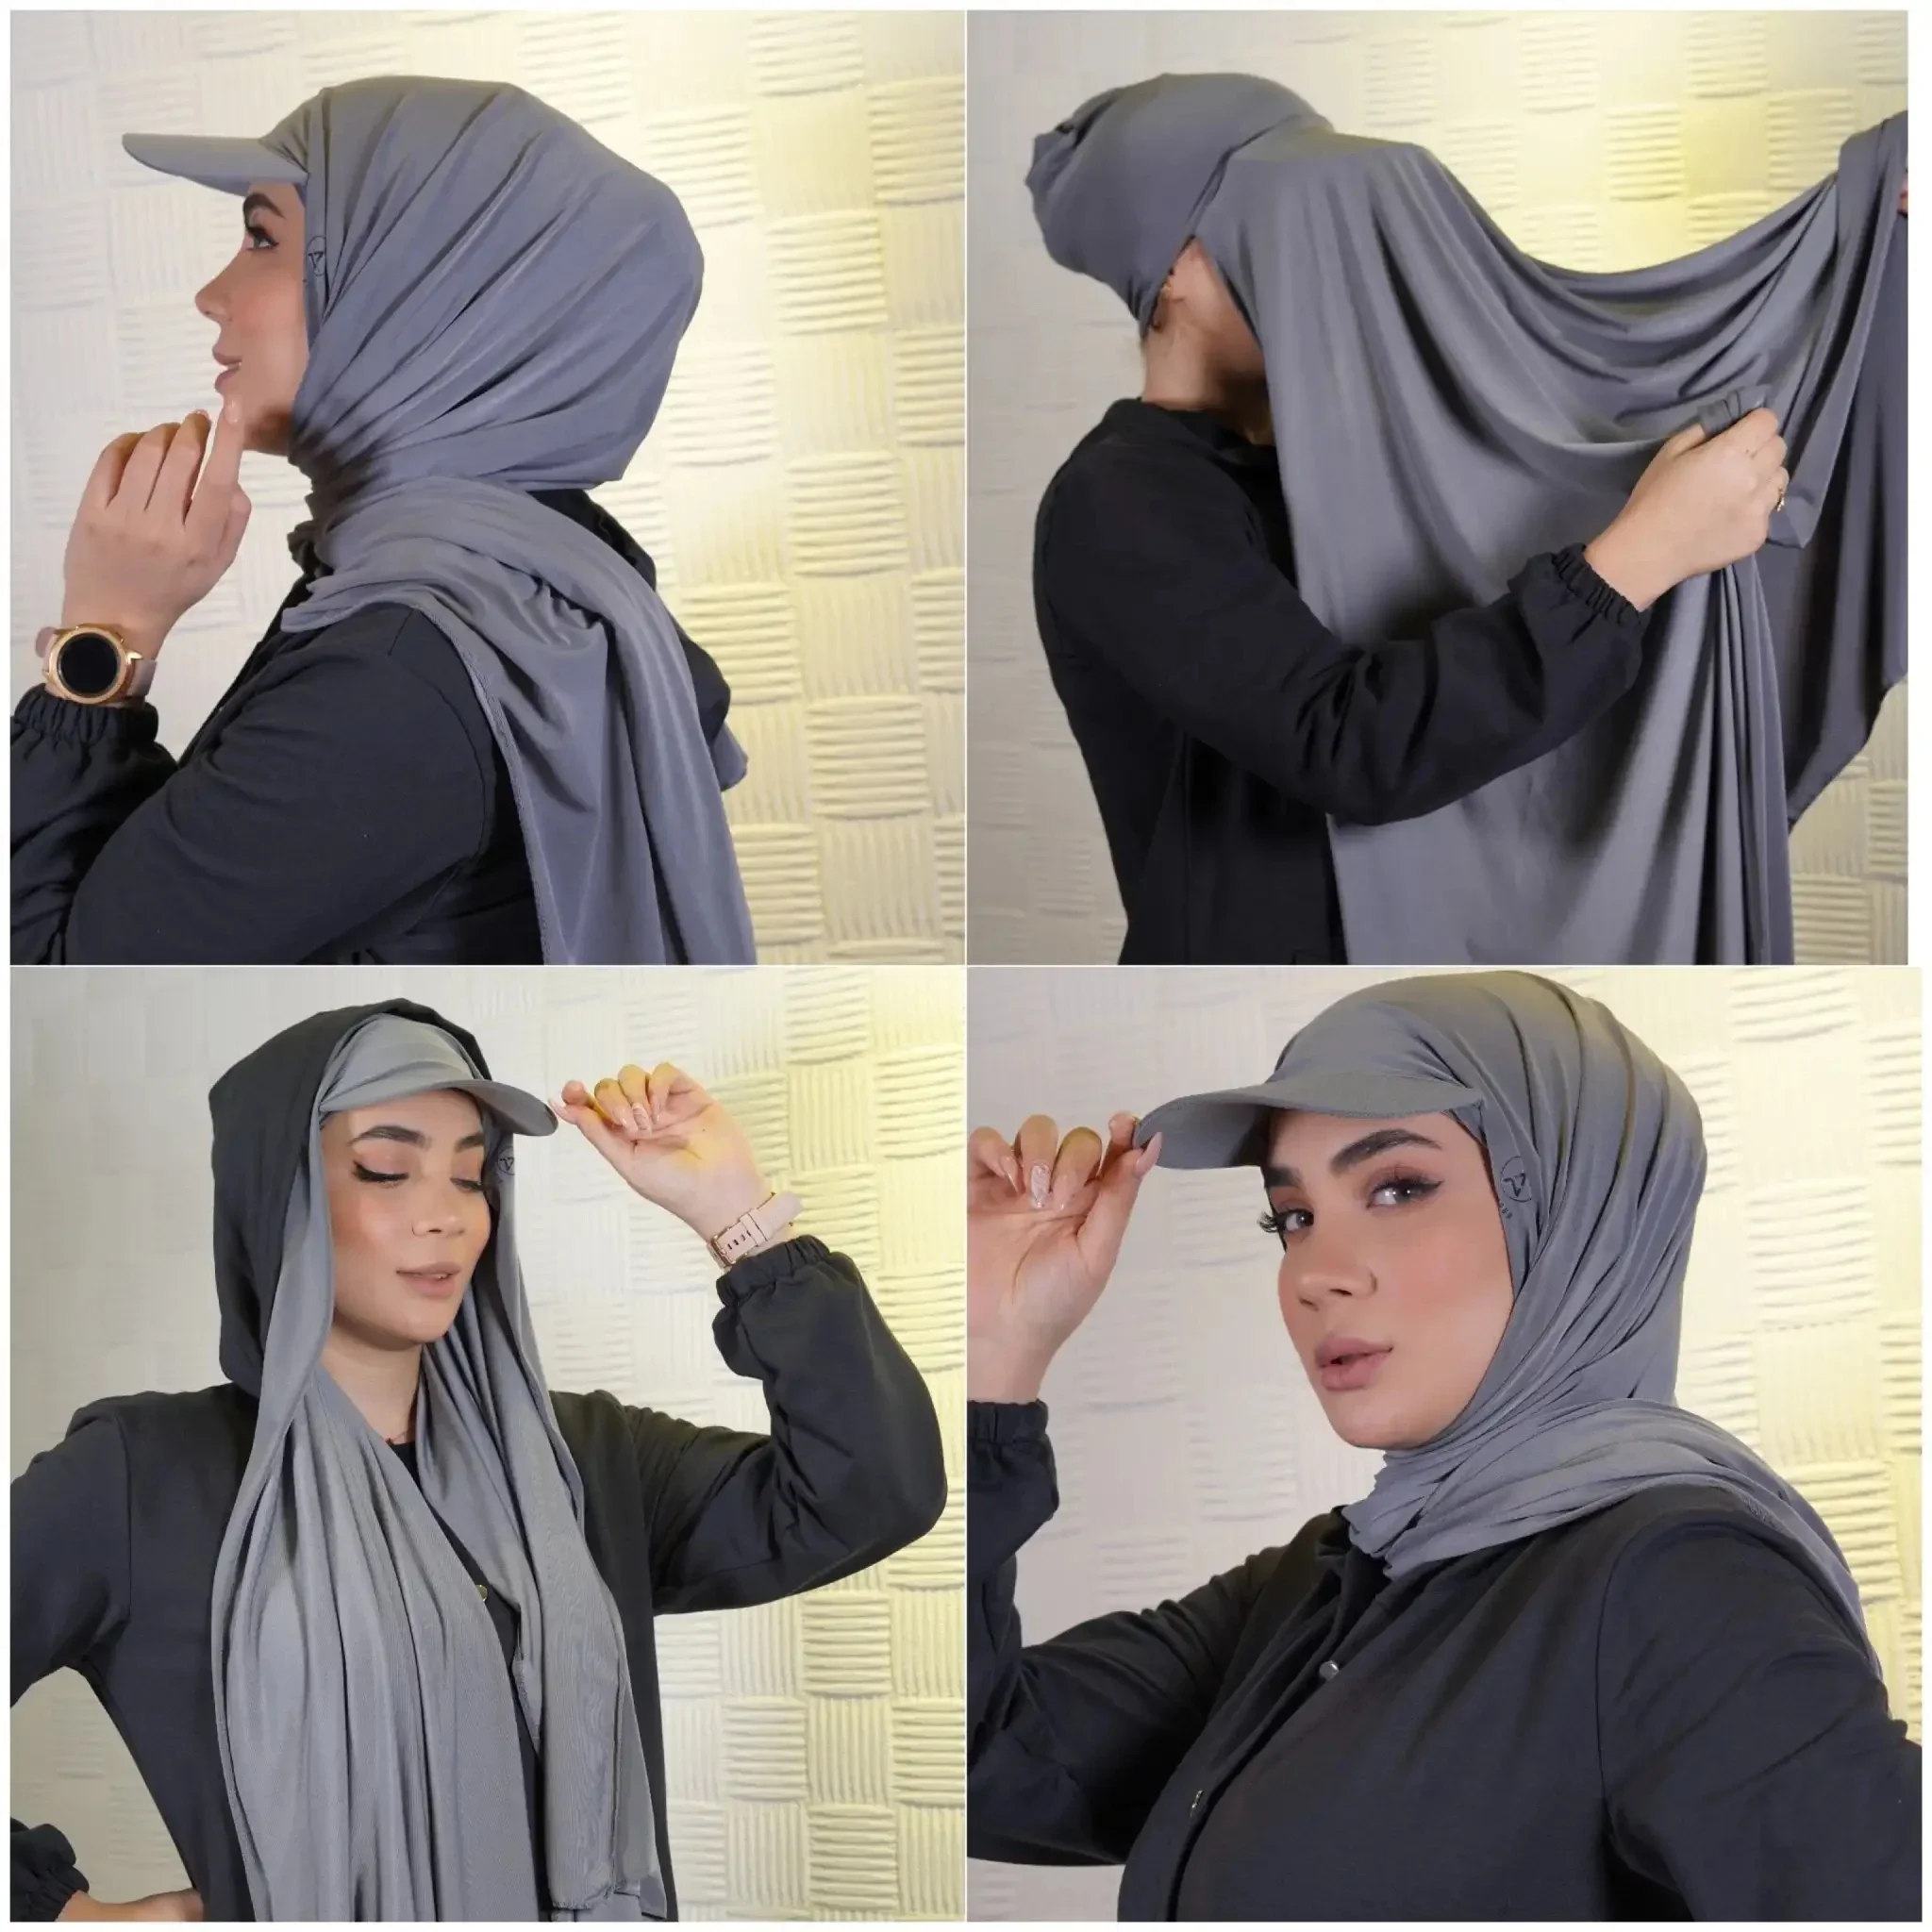 

2023 New Fashion Women Hijab Baseball Caps with Instant Jersey Scarf Ready To Wear HIjab Headwrap Islamic Clothing Accessories